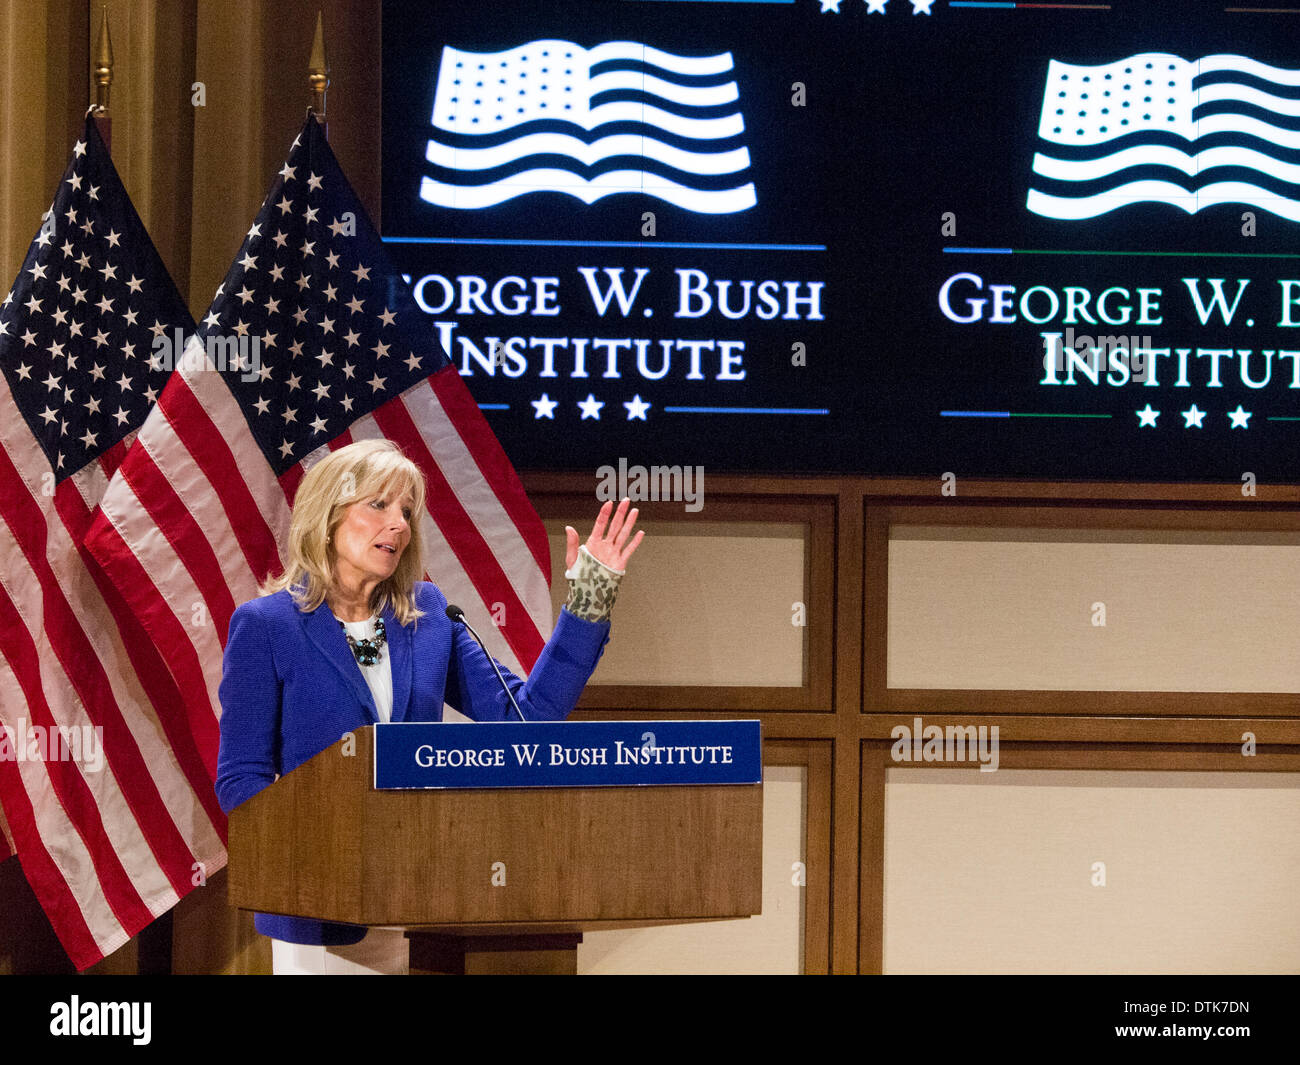 Dallas, TX, USA . 19th Feb, 2014.  Jill Biden, wife of Vice President Joe Biden, jokes about being a 'wounded warrior' holding up the cast on her broken wrist, in OD camouflage. She and the First Lady, Micheal Obama formed Joining Forces to help military veteran's get back to civilian life. Credit:  J. G. Domke/Alamy Live News Stock Photo